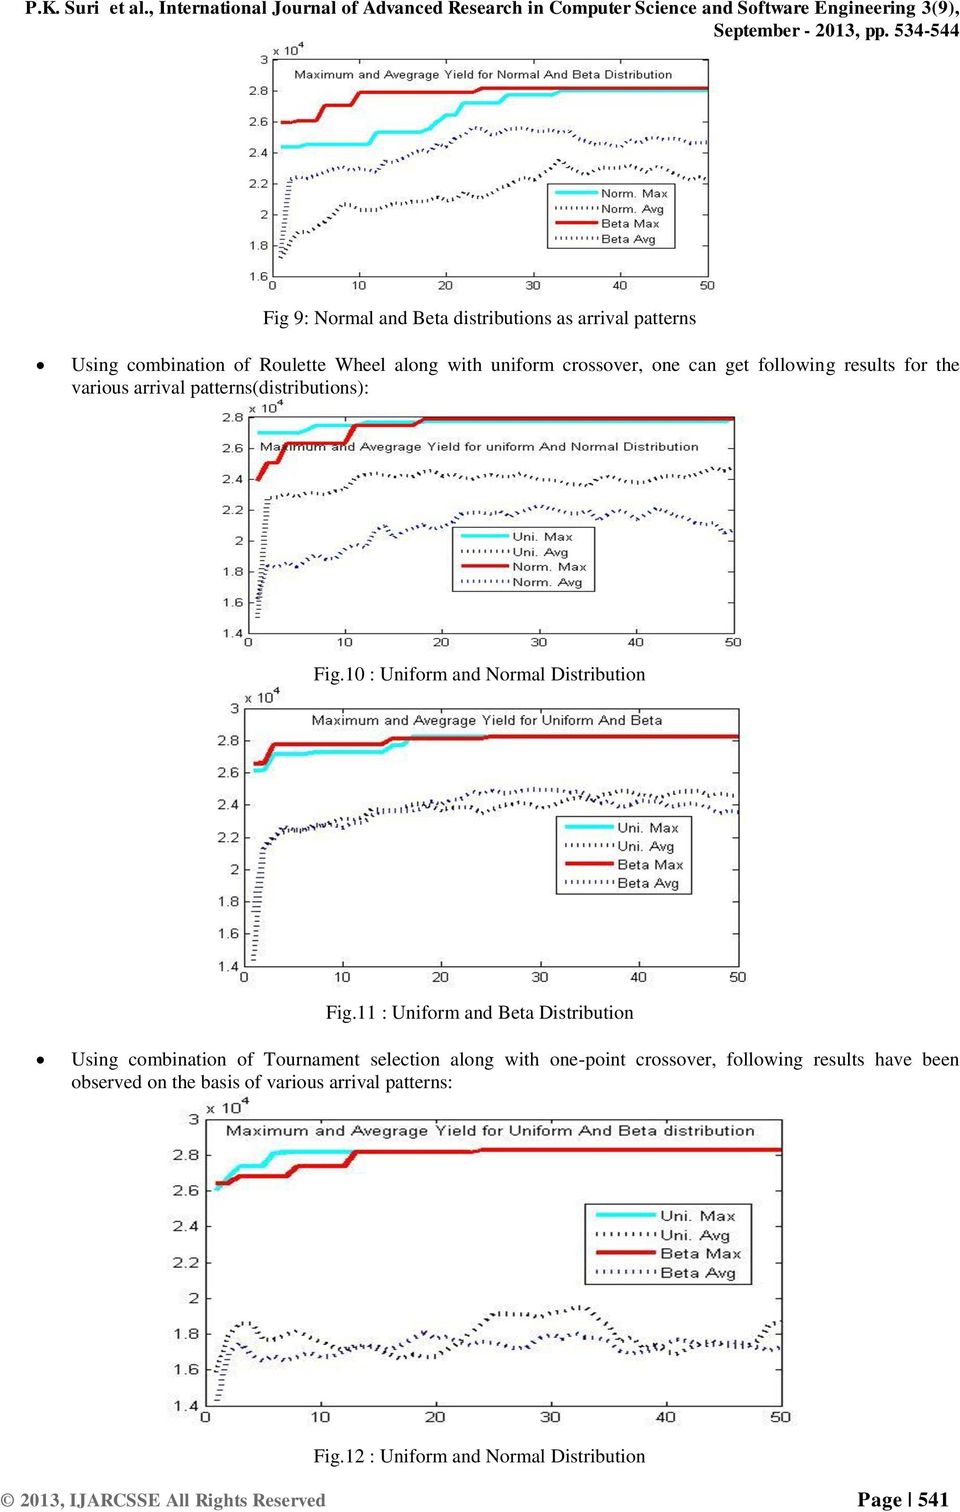 11 : Uniform and Beta Distribution Using combination of Tournament selection along with one-point crossover, following results